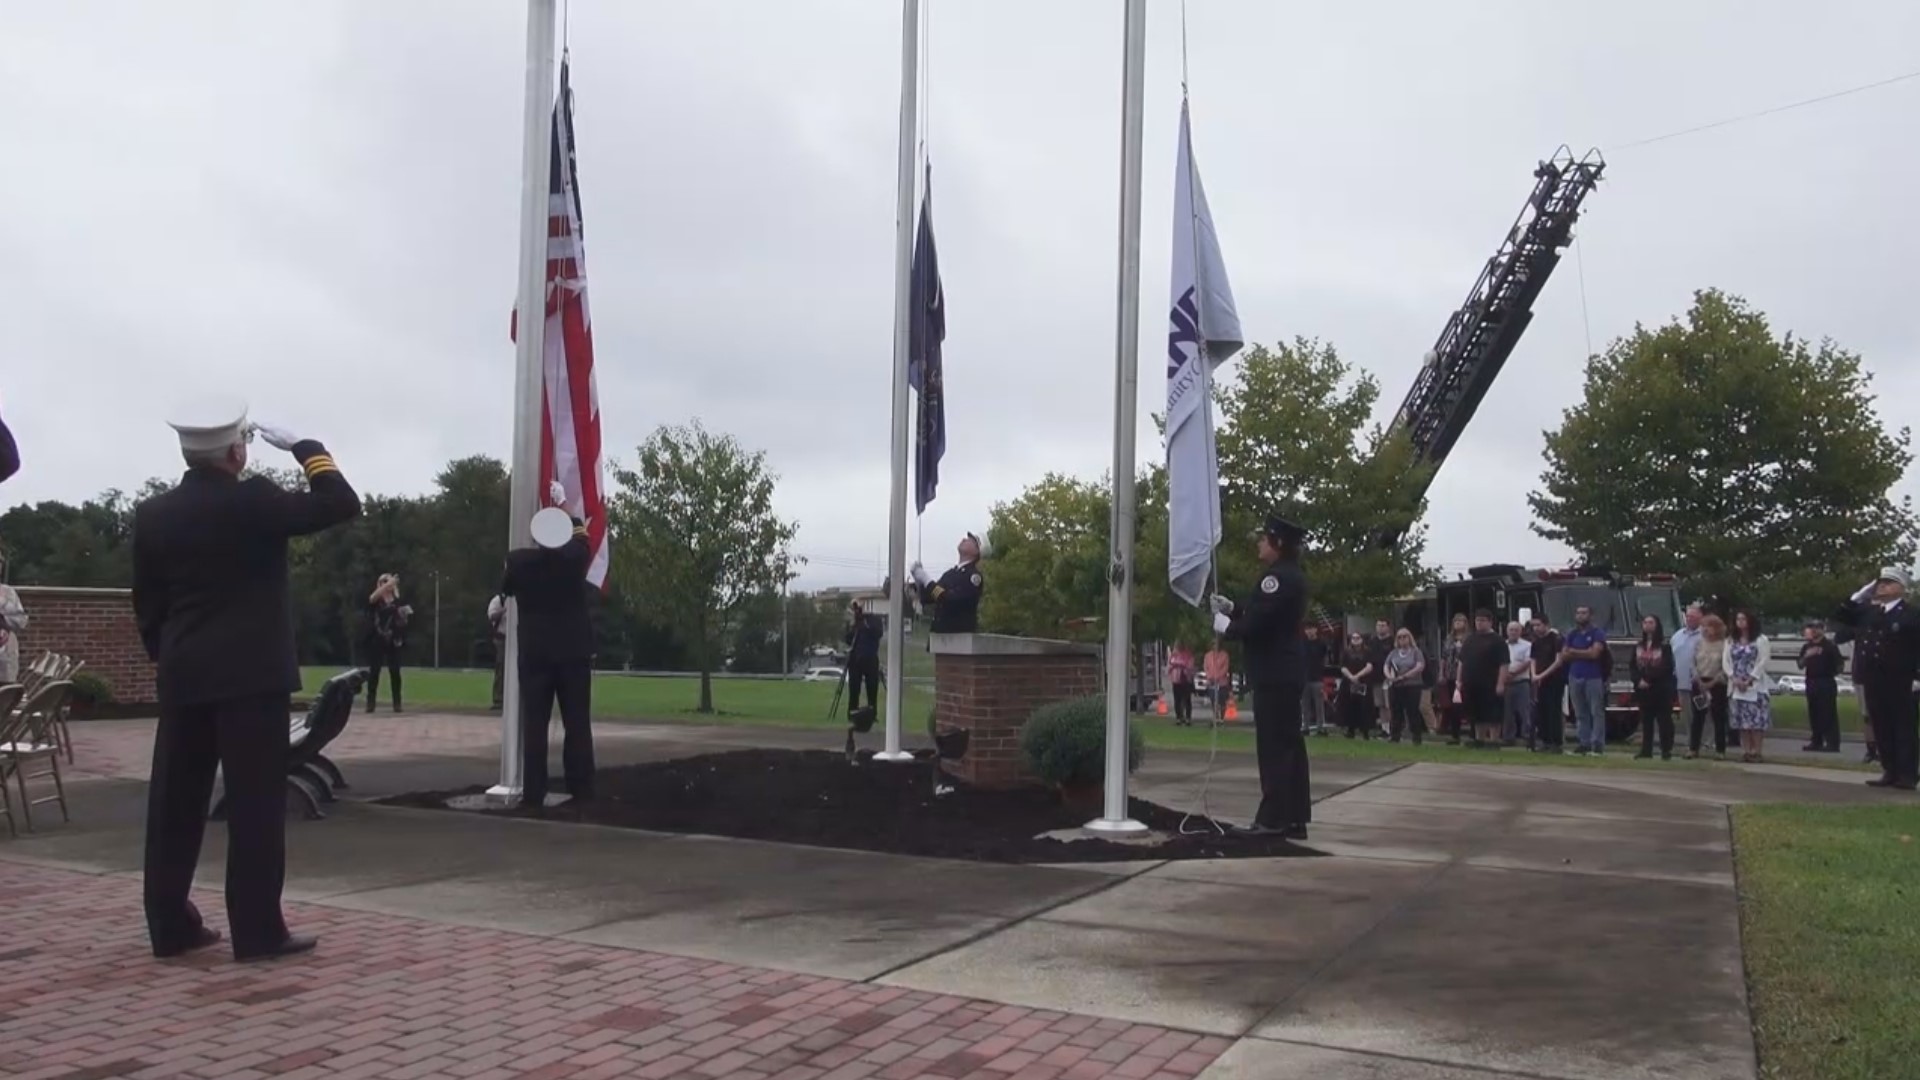 A 9/11 remembrance ceremony was held Monday morning in Luzerne County.